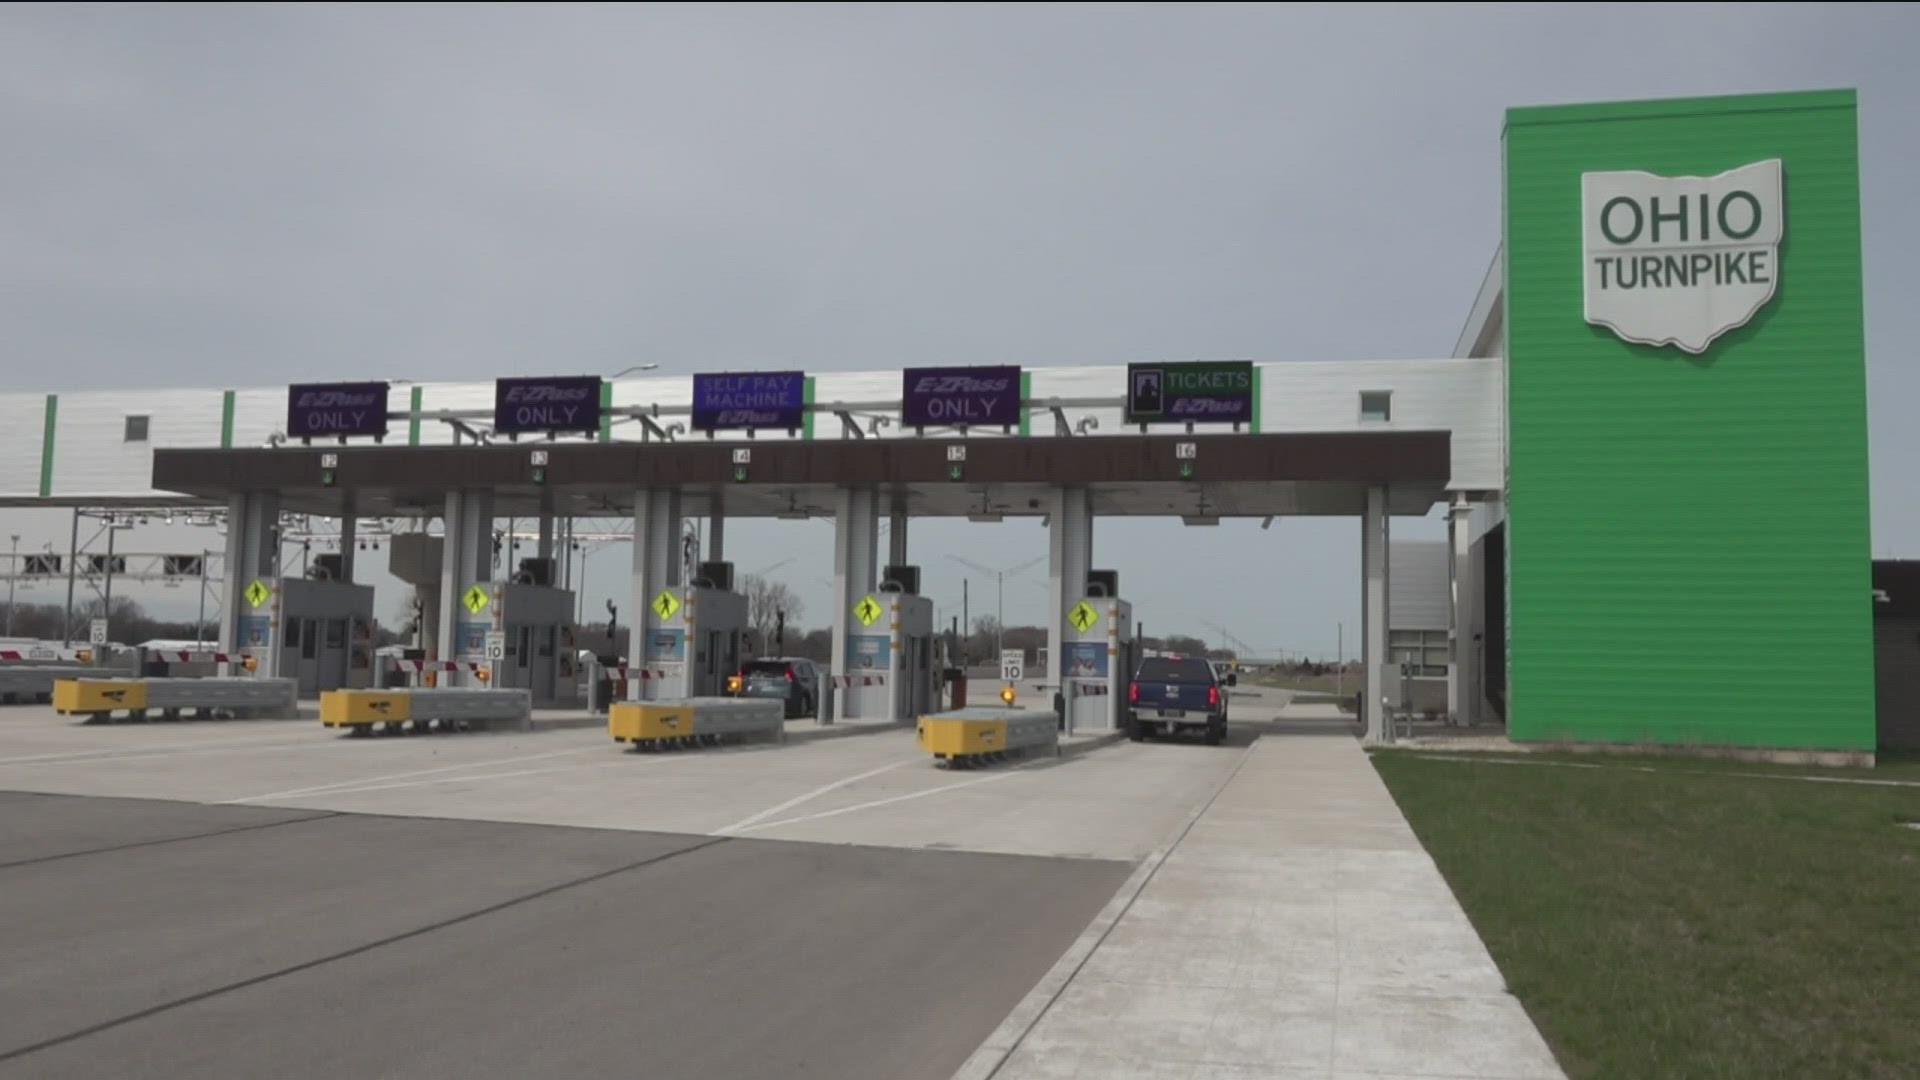 Legitimate collections of unpaid tolls will never occur over text, the Turnpike said.